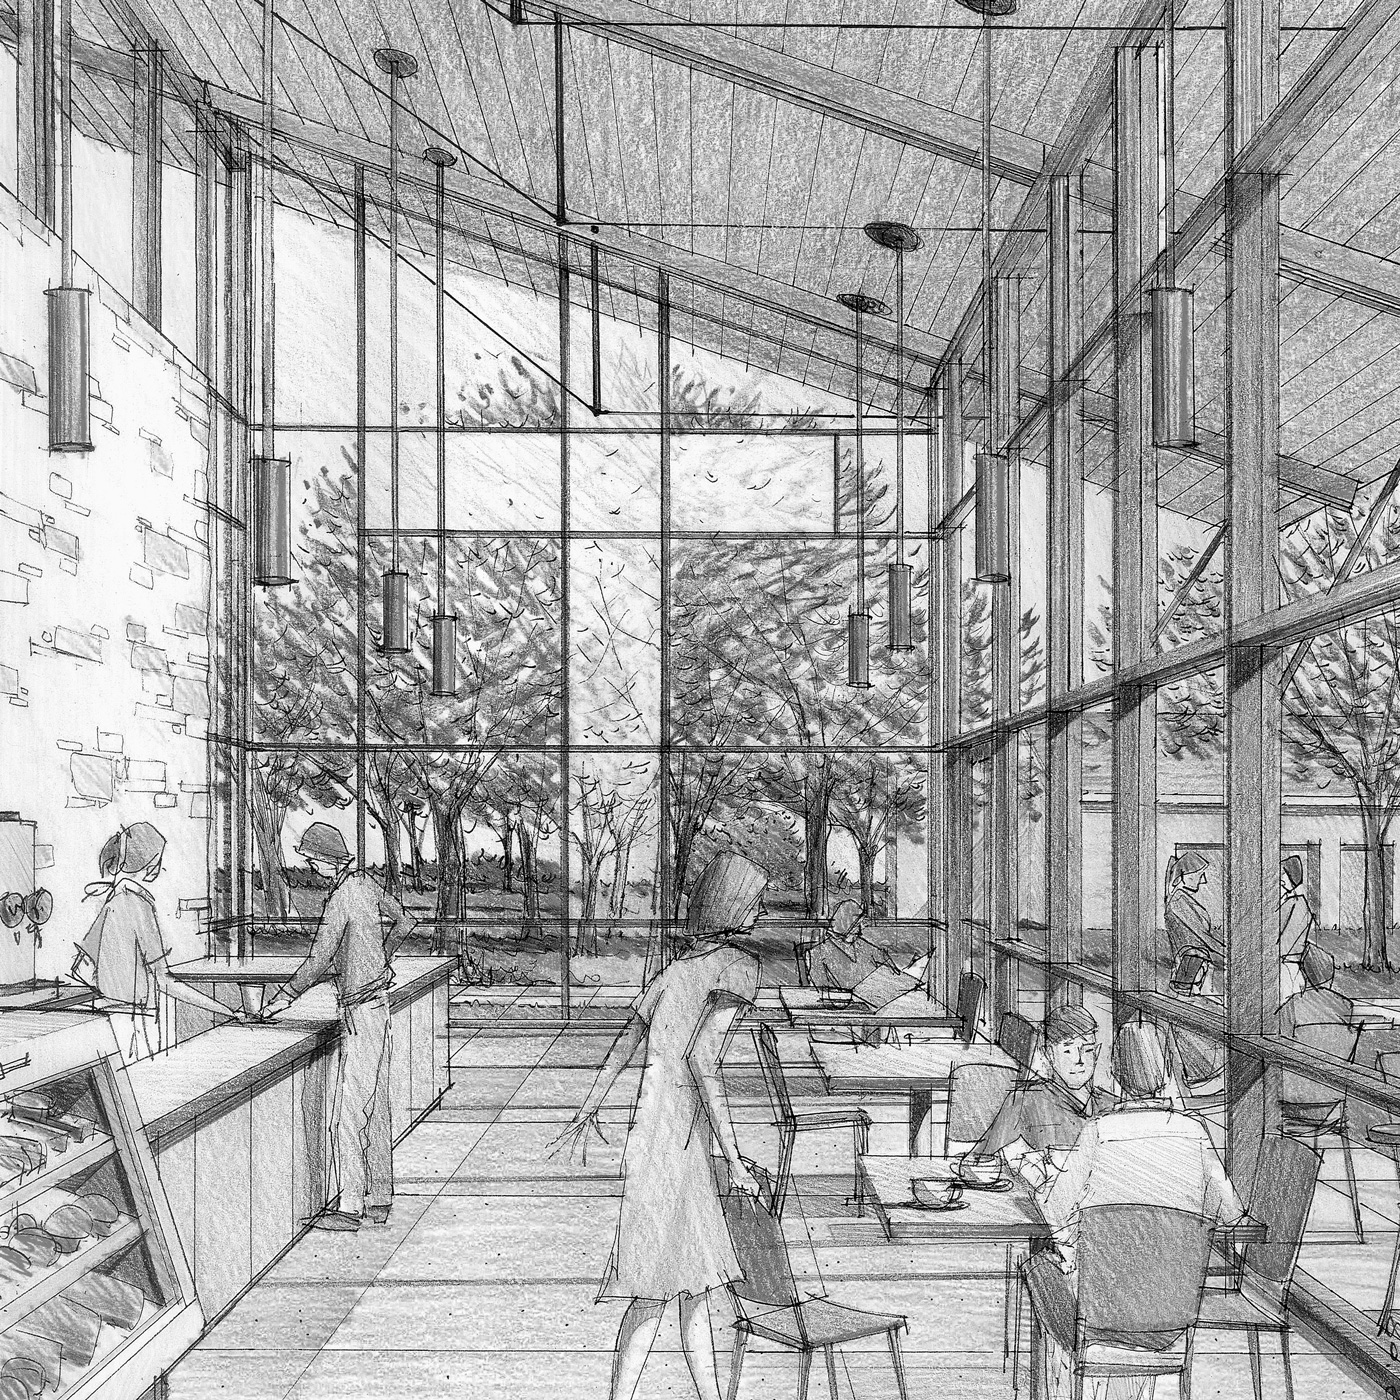 Pencil sketch of cafe space with large windows and high ceiling.